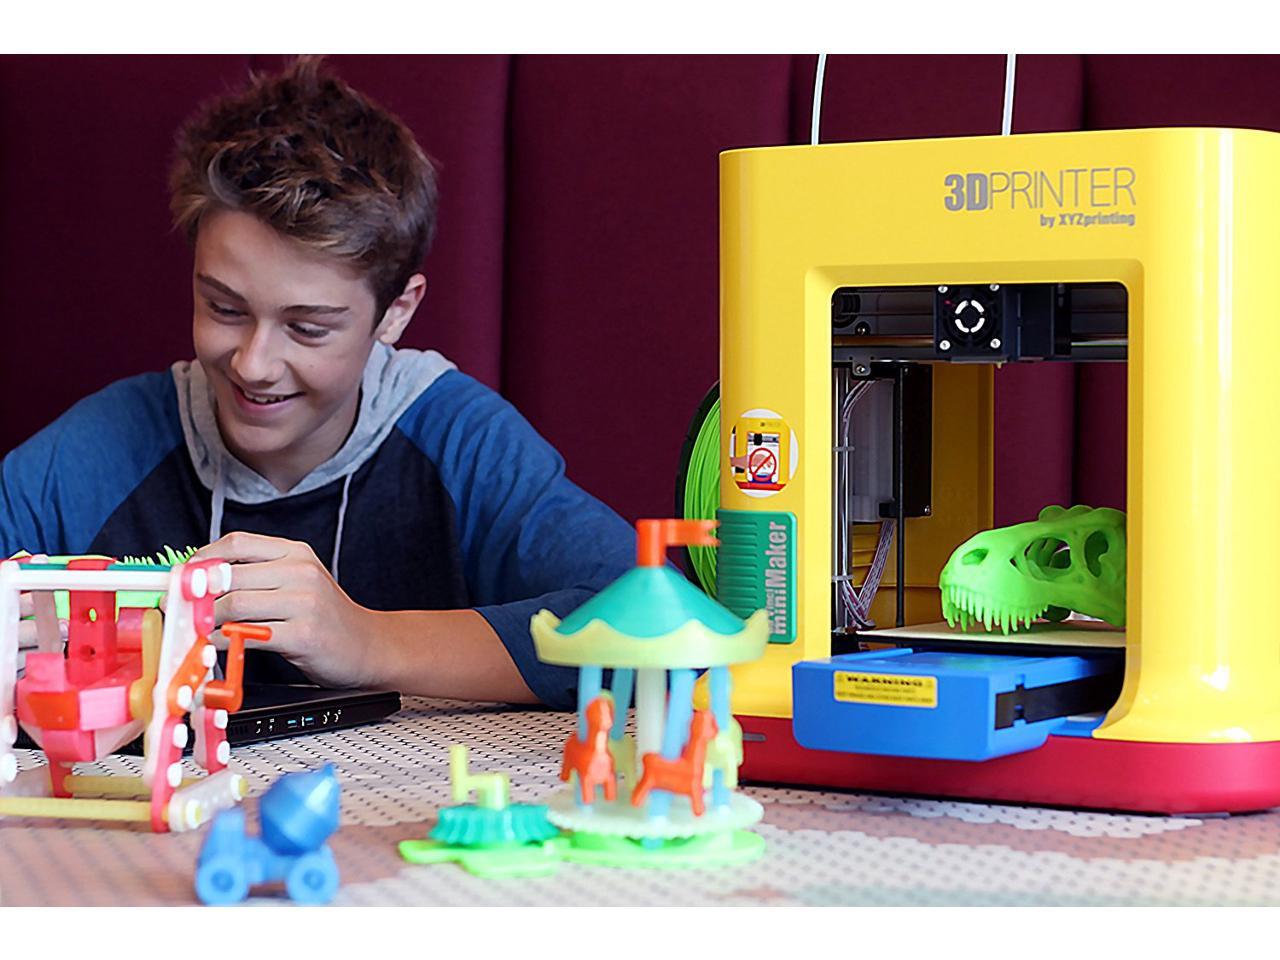 3D printing is a lot of fun, and kids love making their own toys. The Da Vinci Minimaker 3D printer ($149.95) lets them build anything up to six inches across.